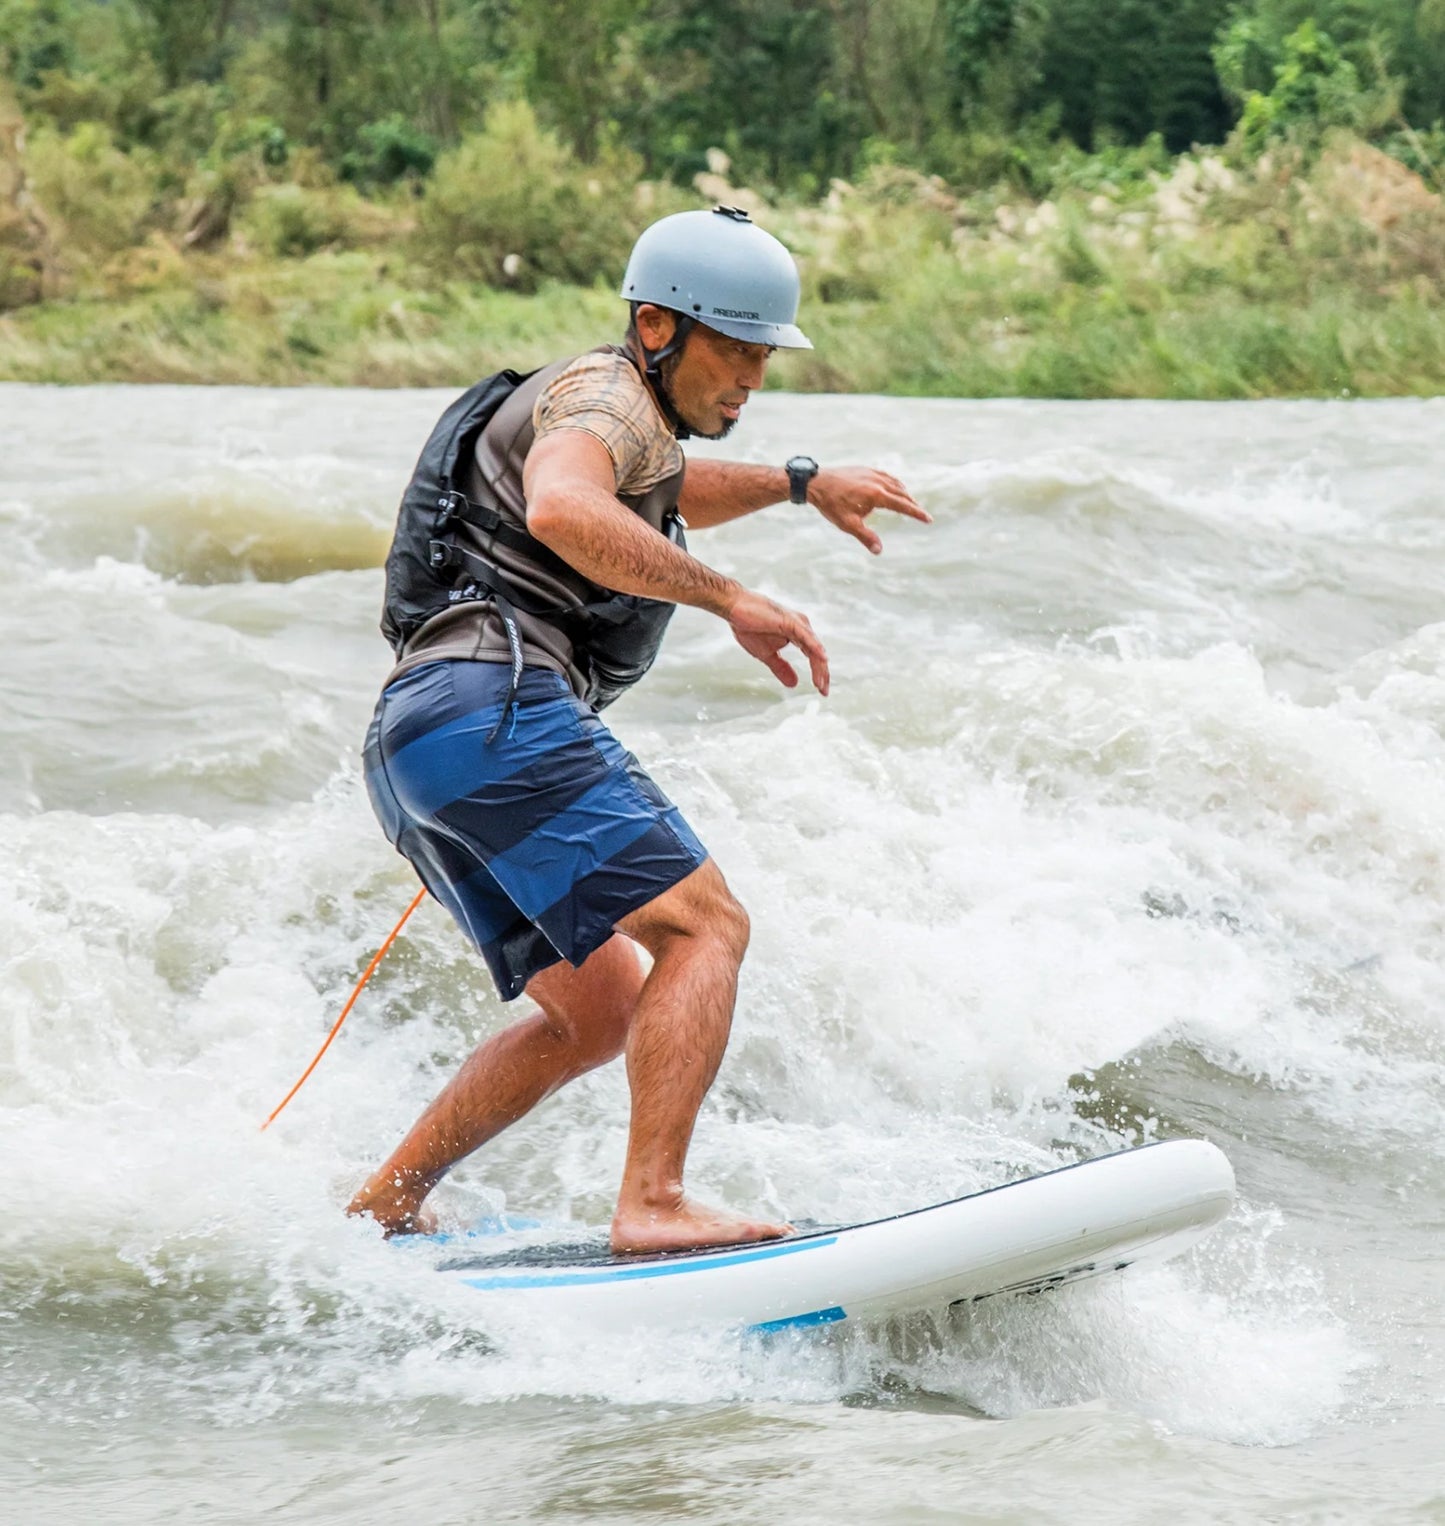 Surfing on a badfish river board